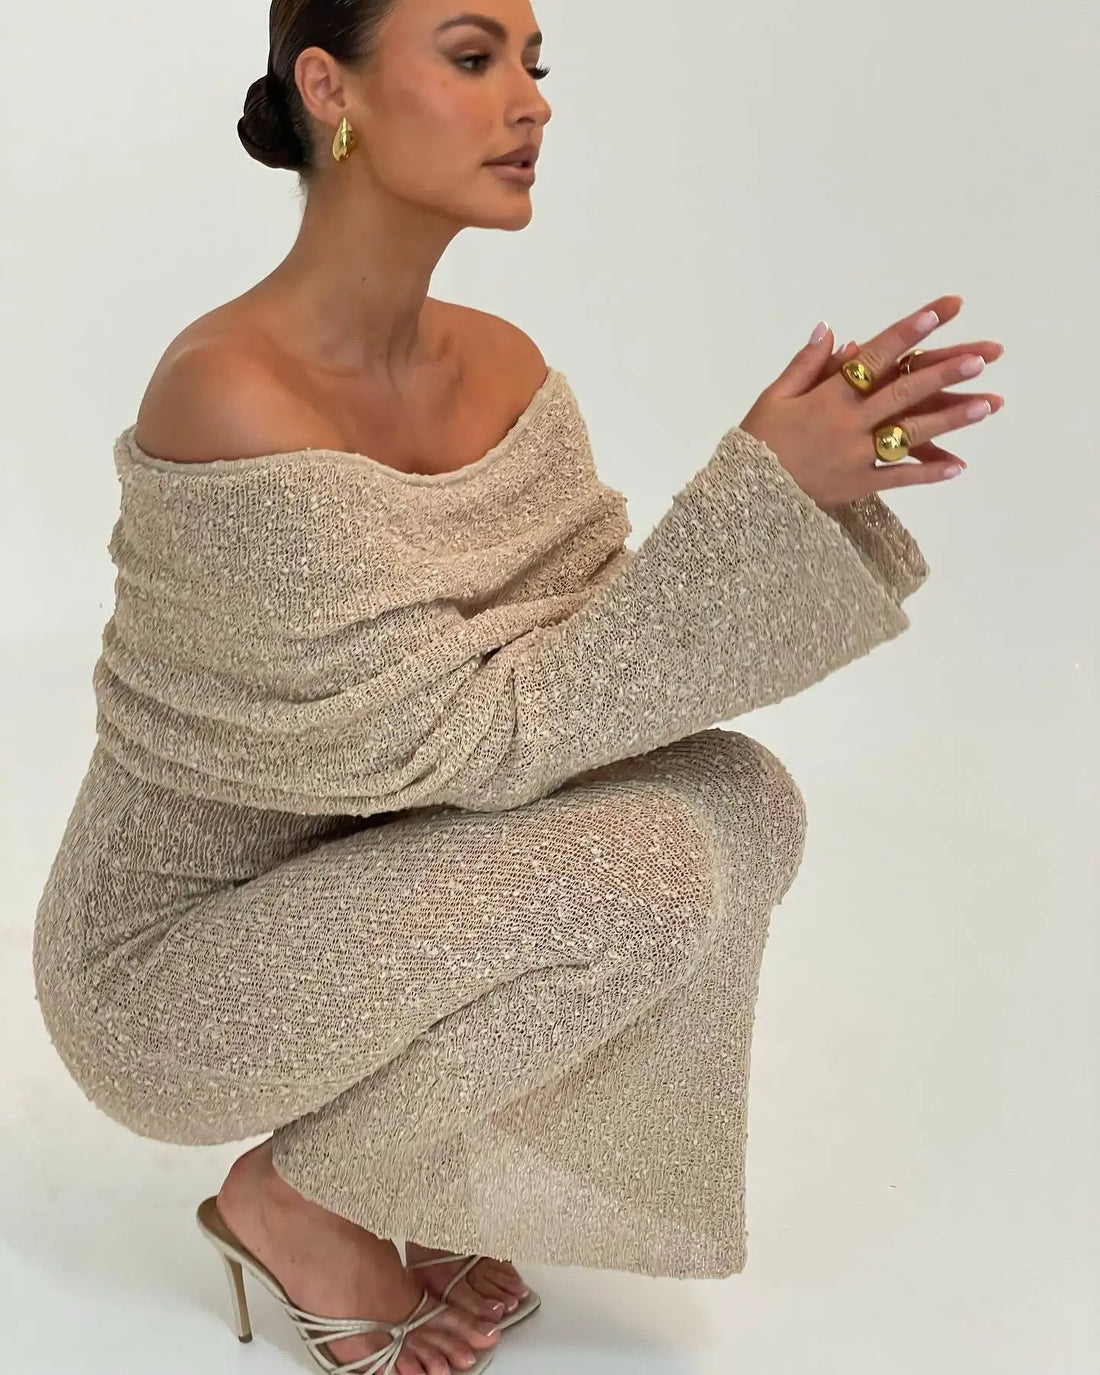 Woman wearing the Khaki Color Cover-Up Off-Shoulder Maxi Dress